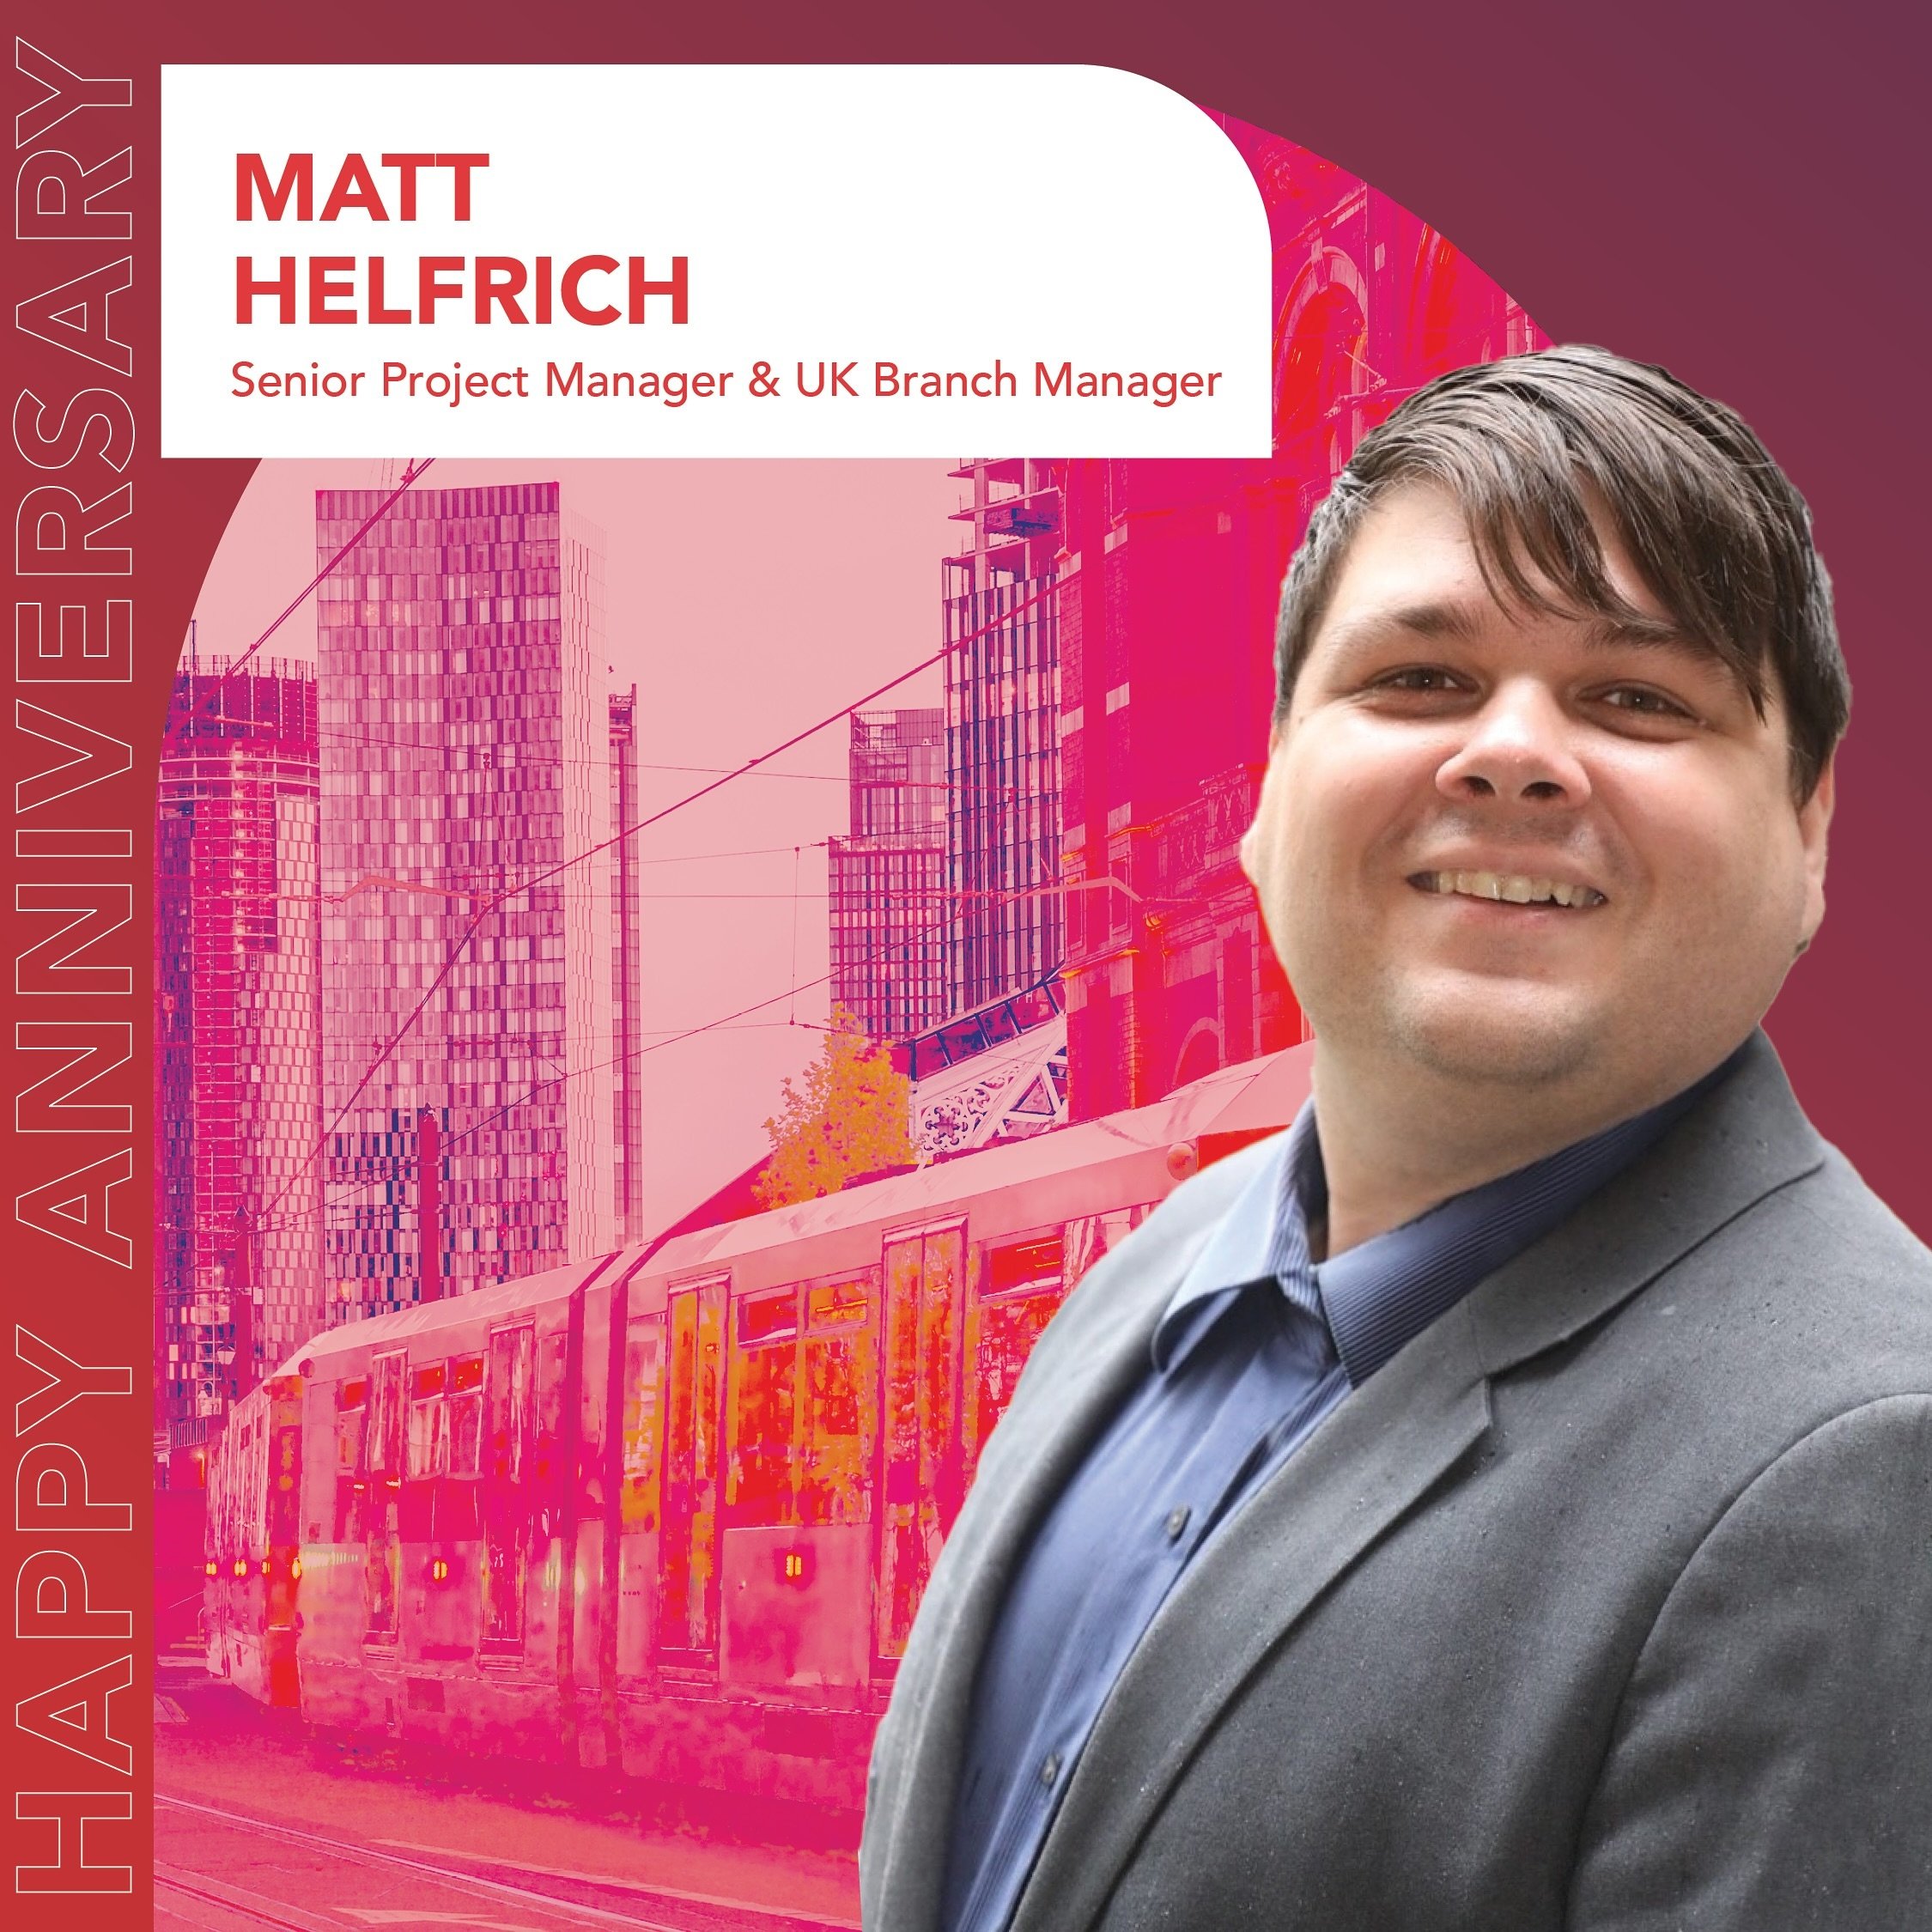 Happy eight year anniversary to our UK Branch Manager &amp; Senior Project Manager @matthelfrich! Matt began as an editor and writer for LINK in his hometown of St. Louis, and his love of adventure and travel led to him representing LINK in Paris and